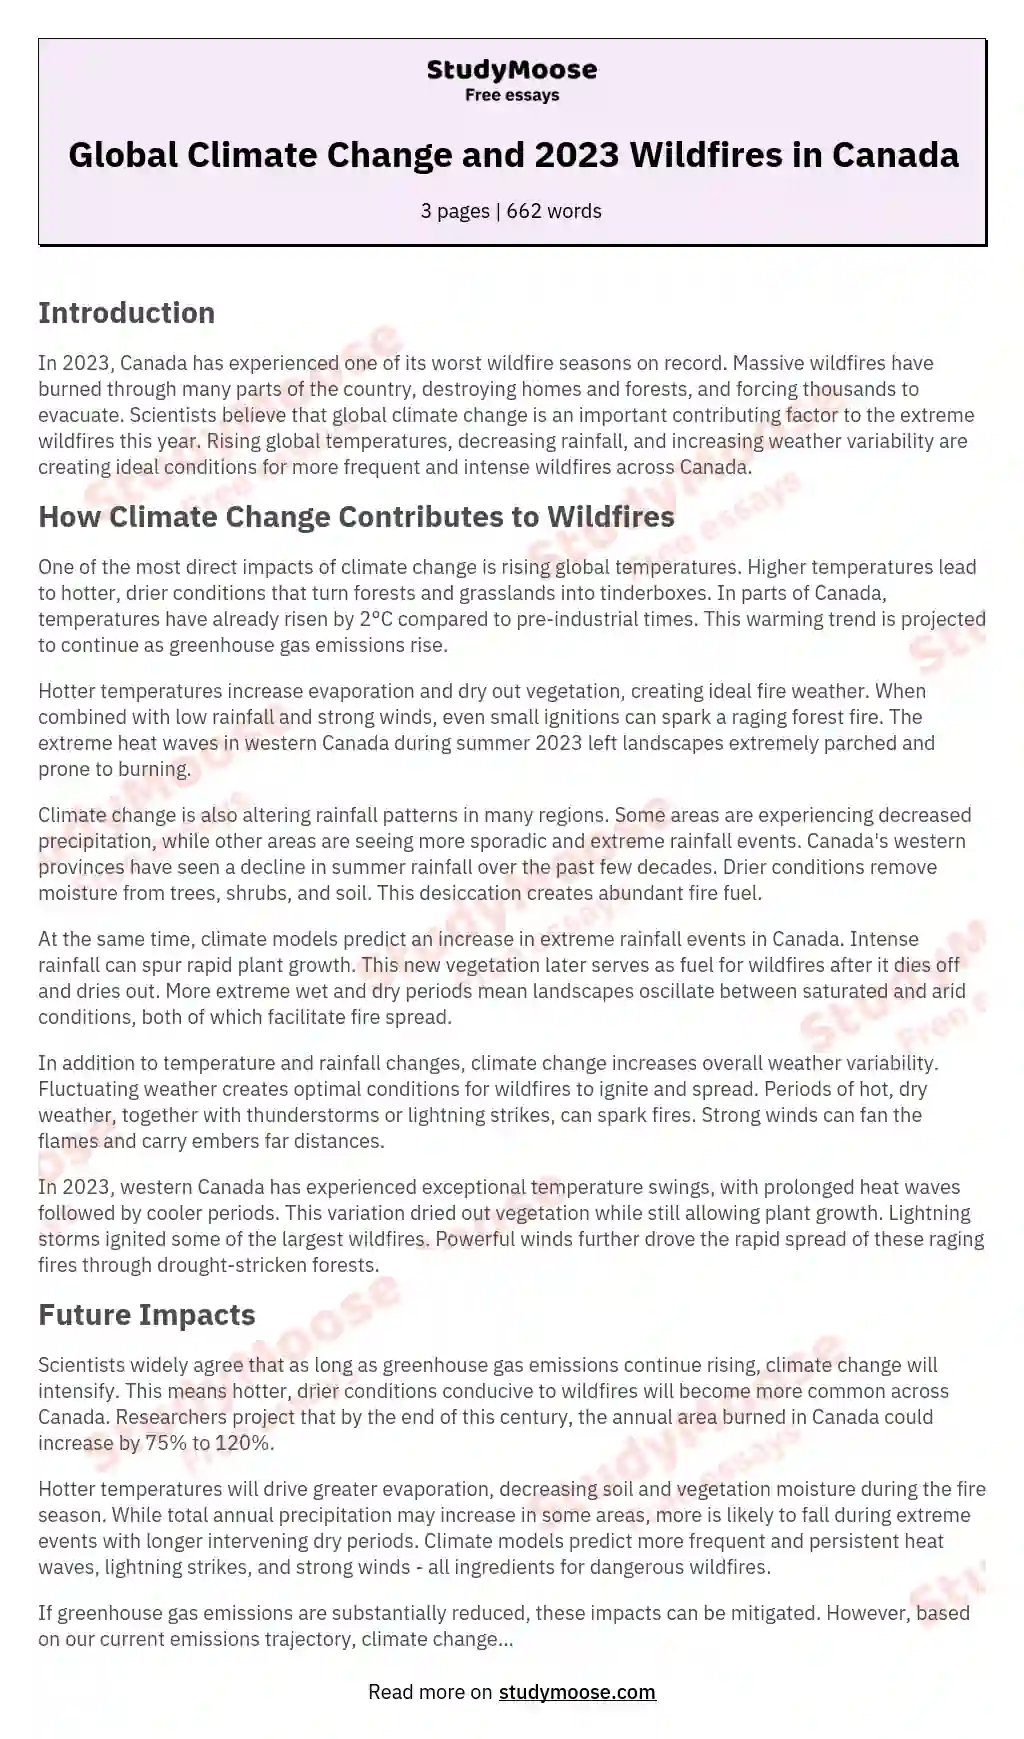 Global Climate Change and 2023 Wildfires in Canada essay